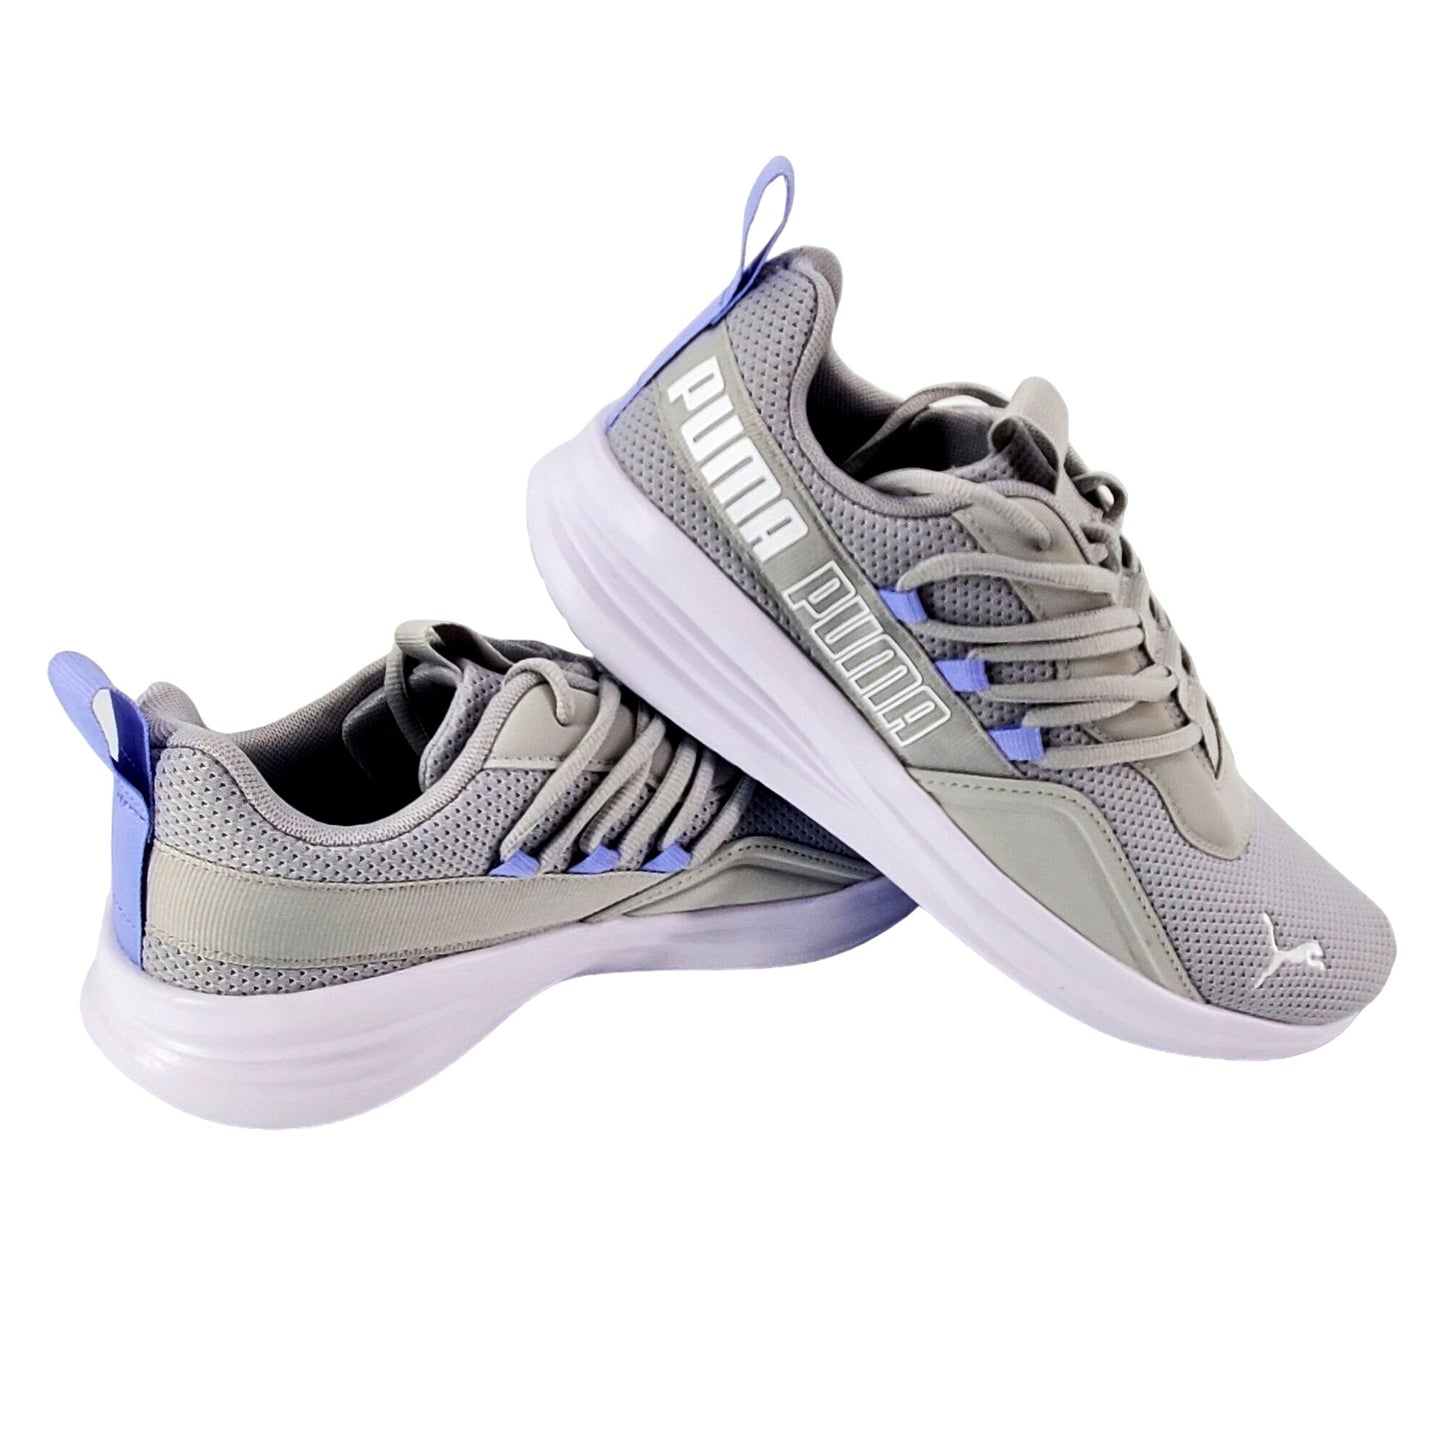 PUMA Sneakers Womens Star Vital Refresh Performance Athletic Shoes Activewear